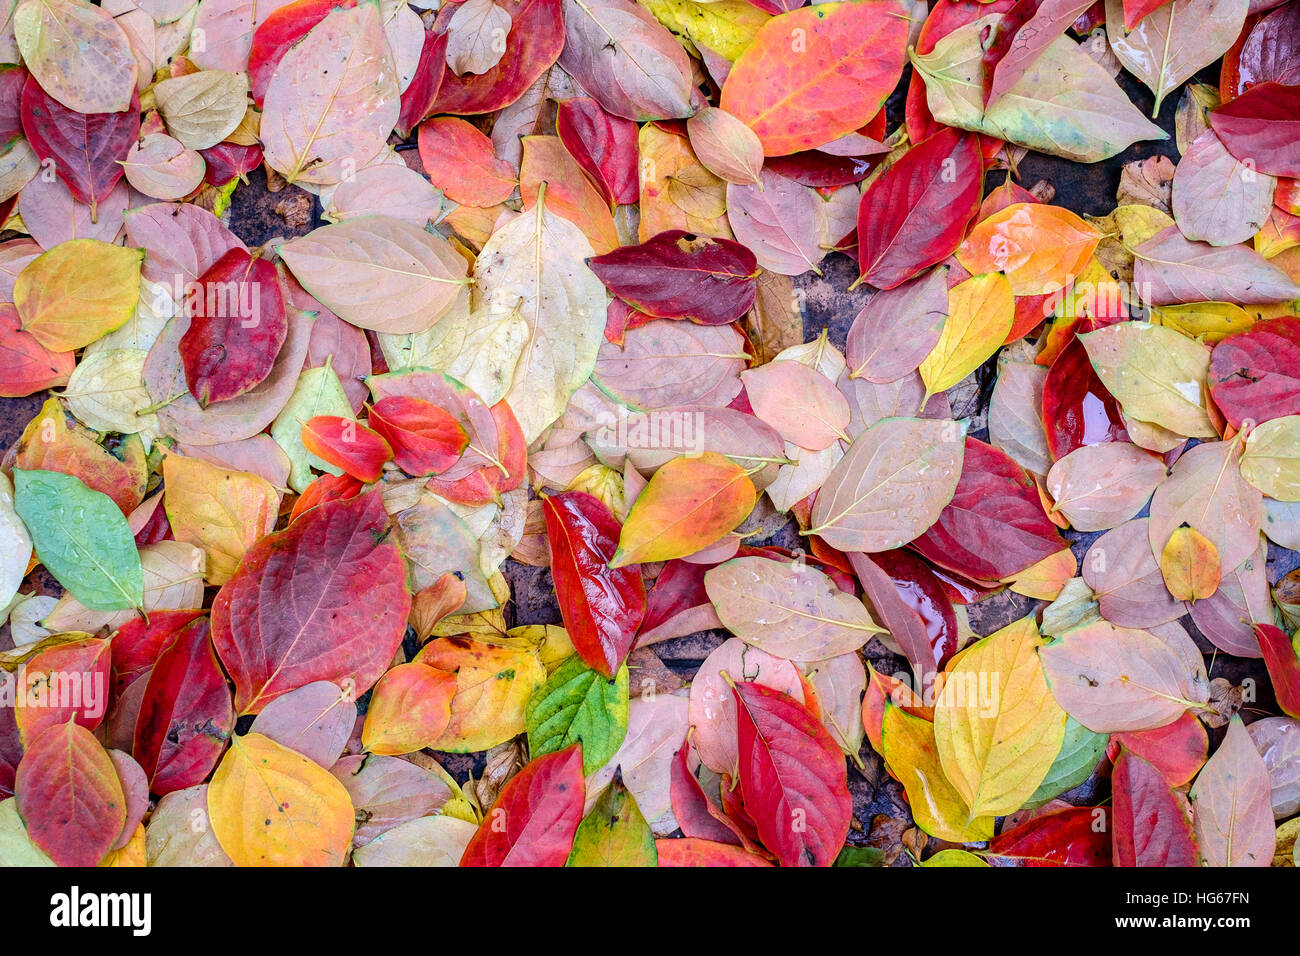 Wet Fall persimmon carpet of leaves Stock Photo